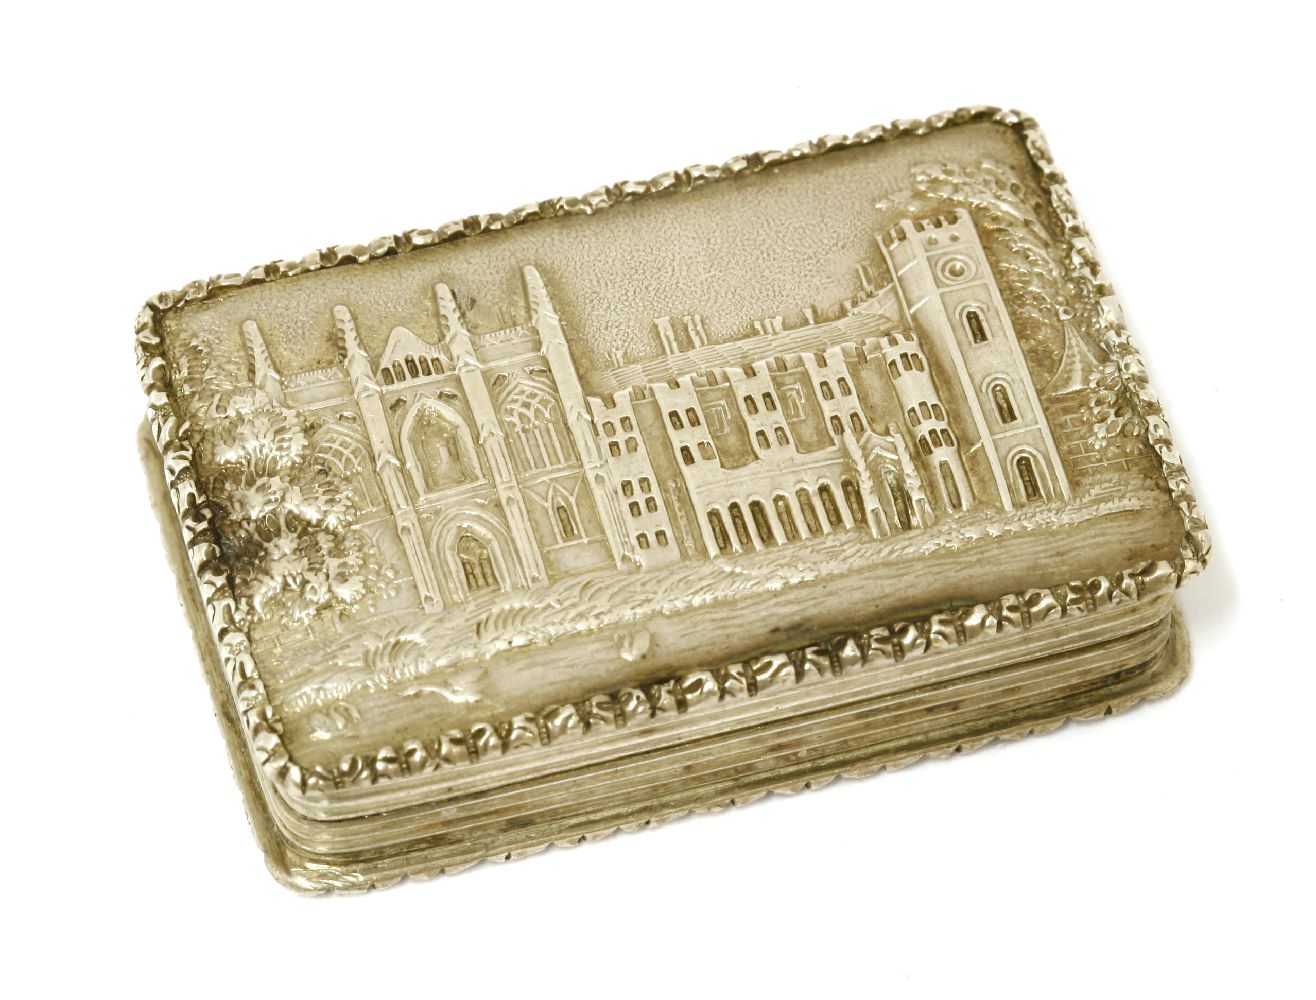 A silver top vinaigrette,Nathaniel Mills, Birmingham 1837,the cover with a view of Newstead Abbey,